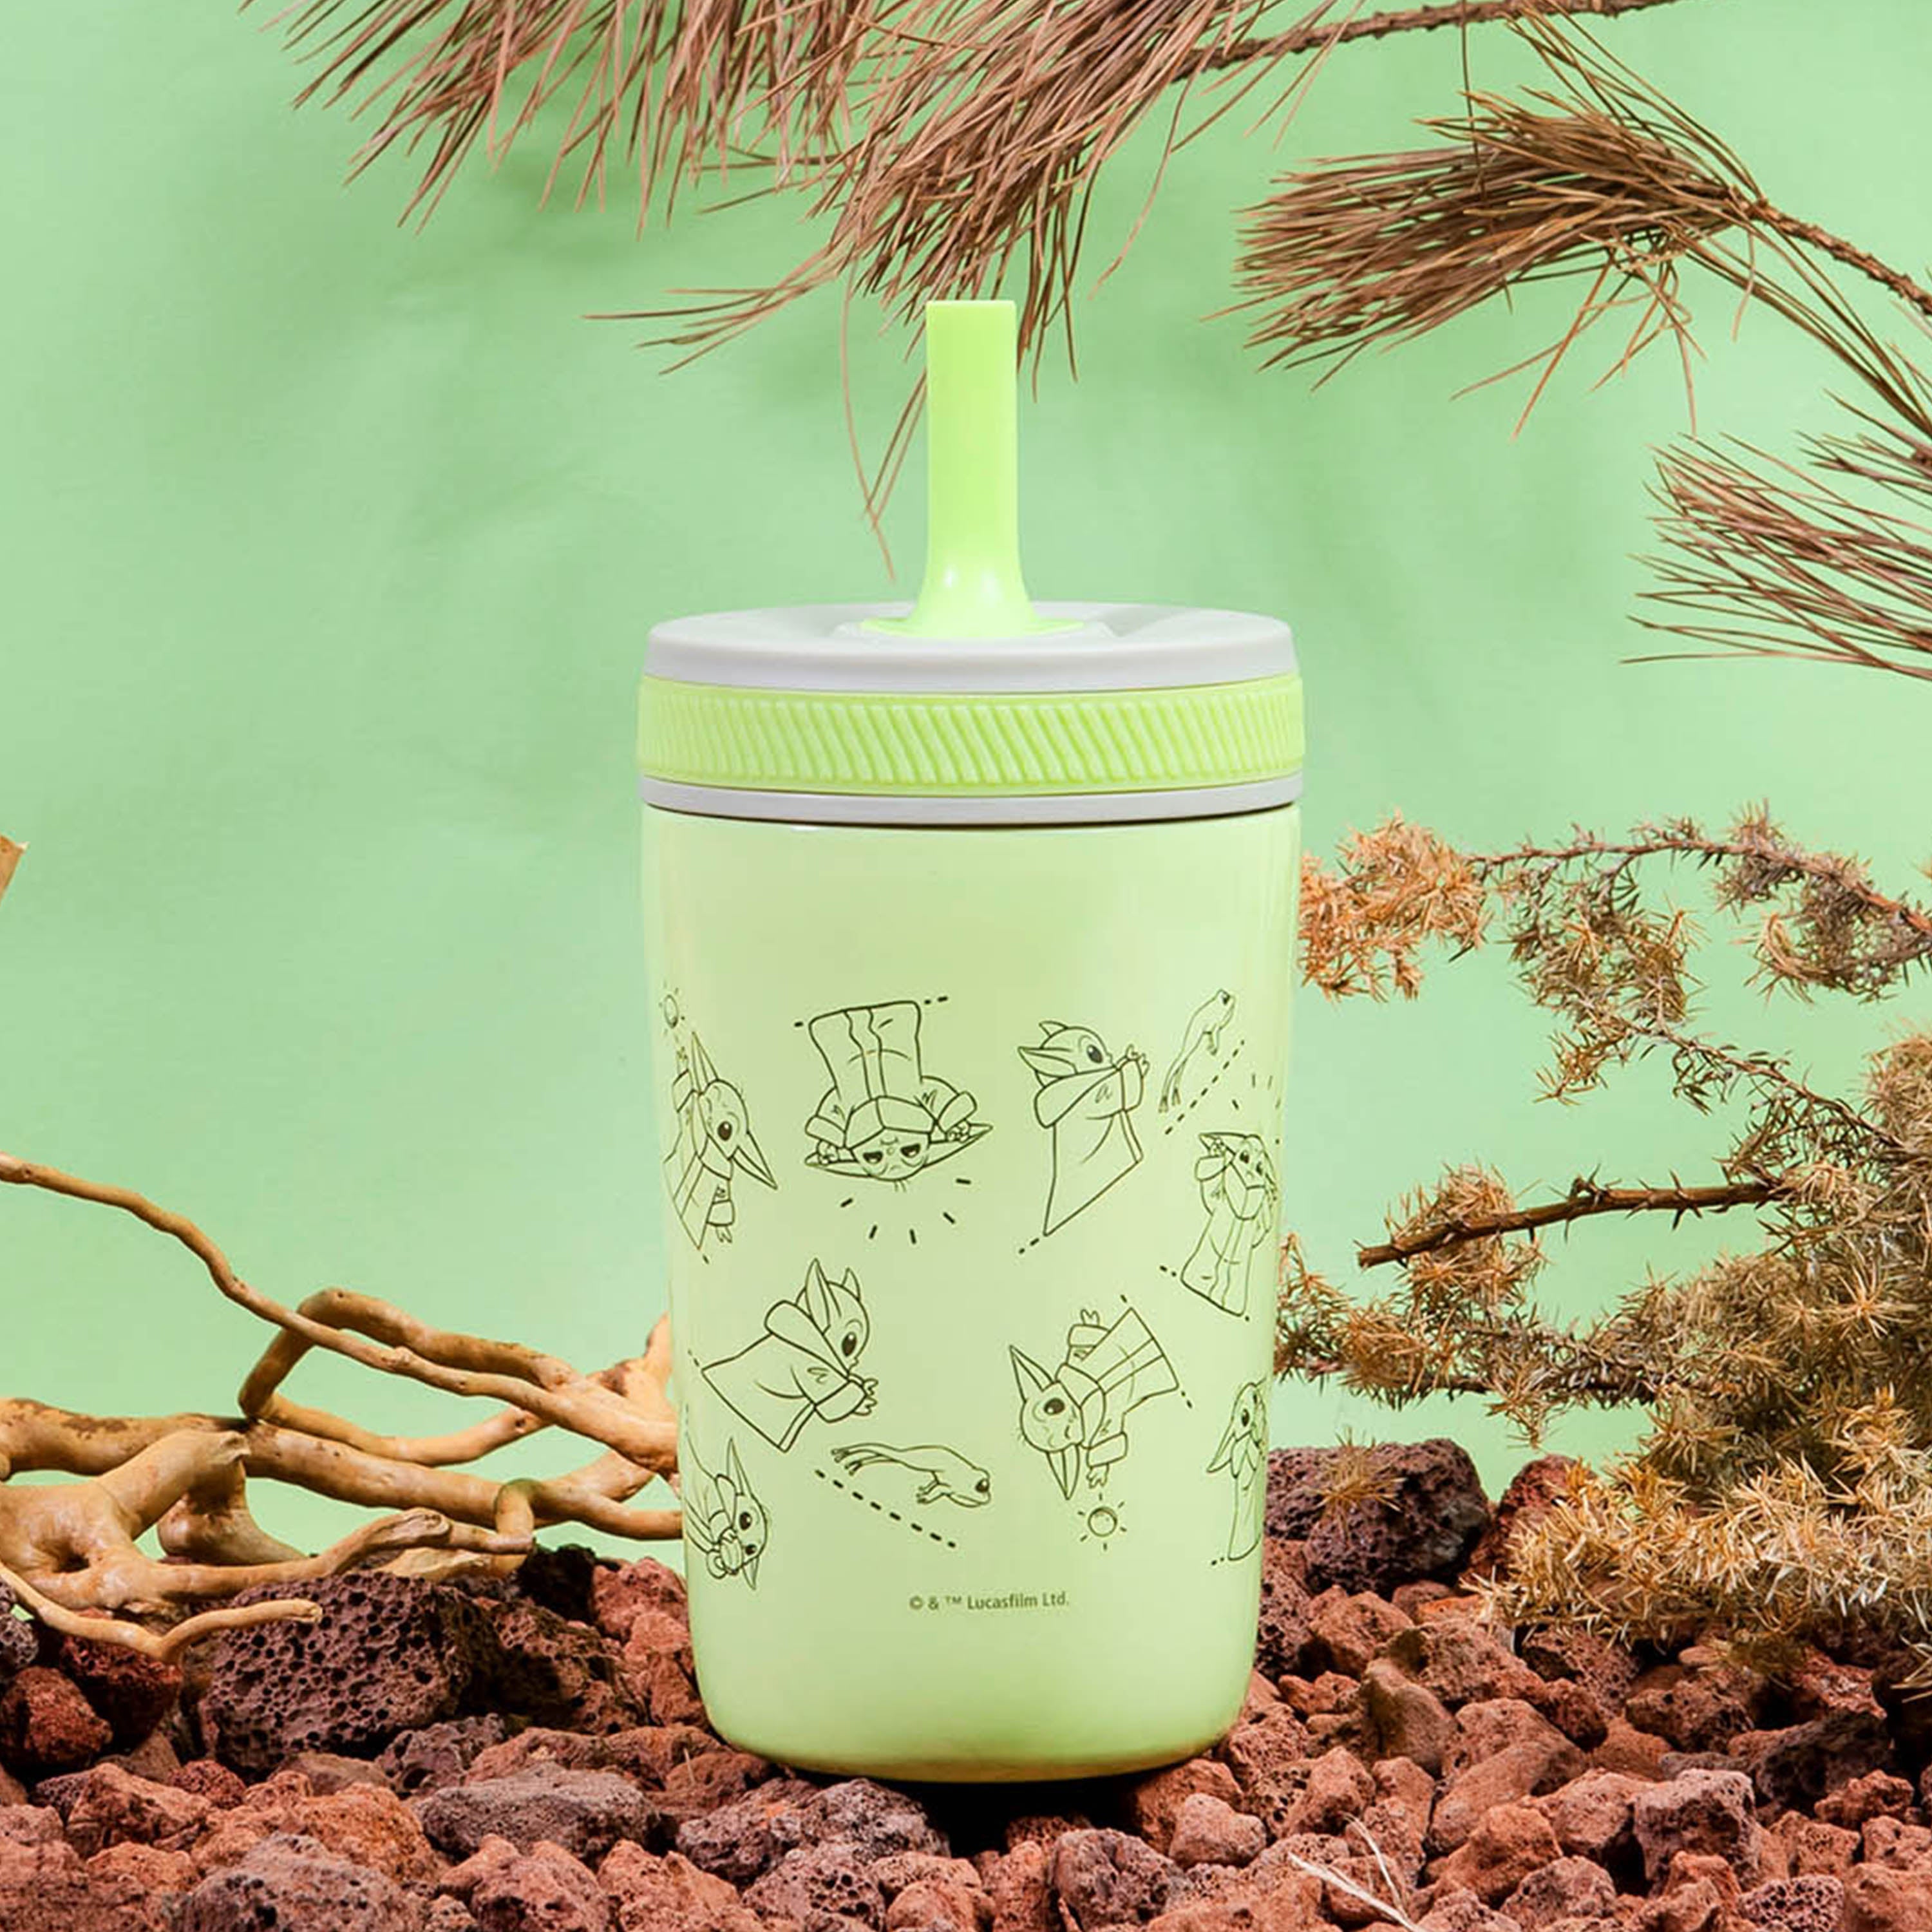 Funky Star Wars The Child Baby Yoda 16 oz. Sports Tumbler with Lid and Straw